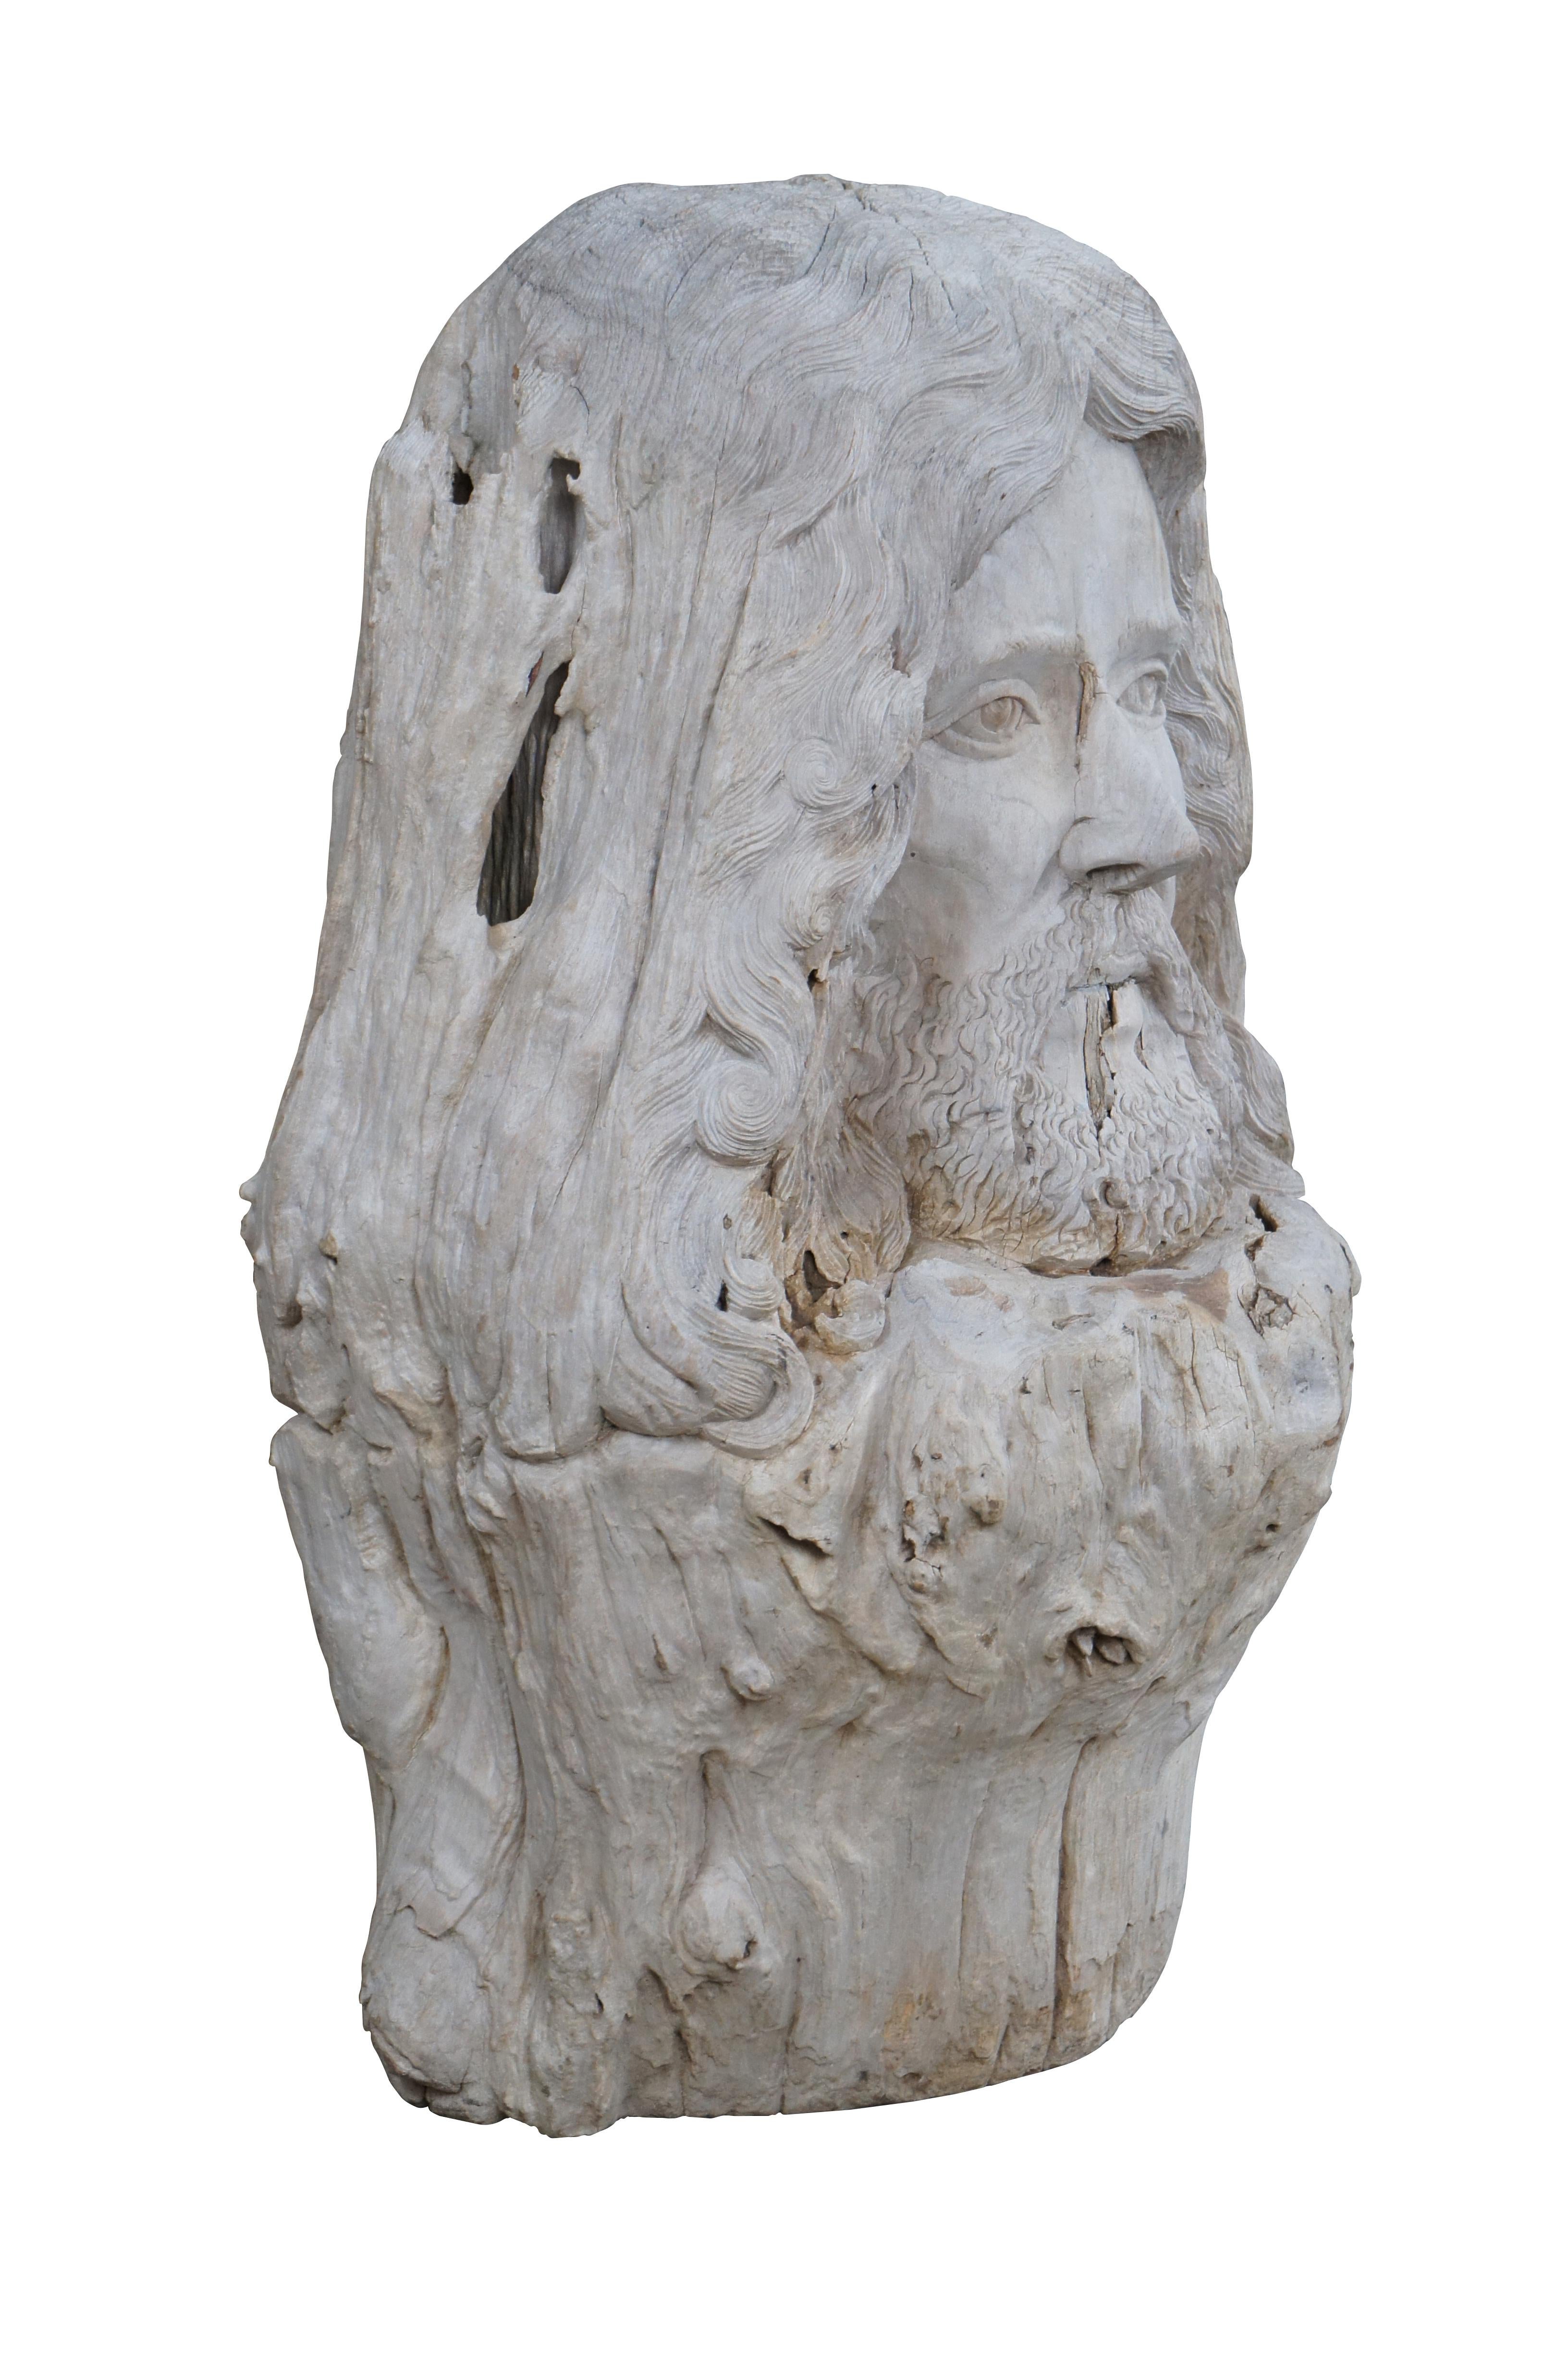 A large driftwood carving of Zues. Handcarved with natural detail from a very heavy piece of driftwood.

In ancient Greek mythology, Zeus is the god of the sky, thunder, and lightning. He is also the king of the gods and the ruler, protector, and